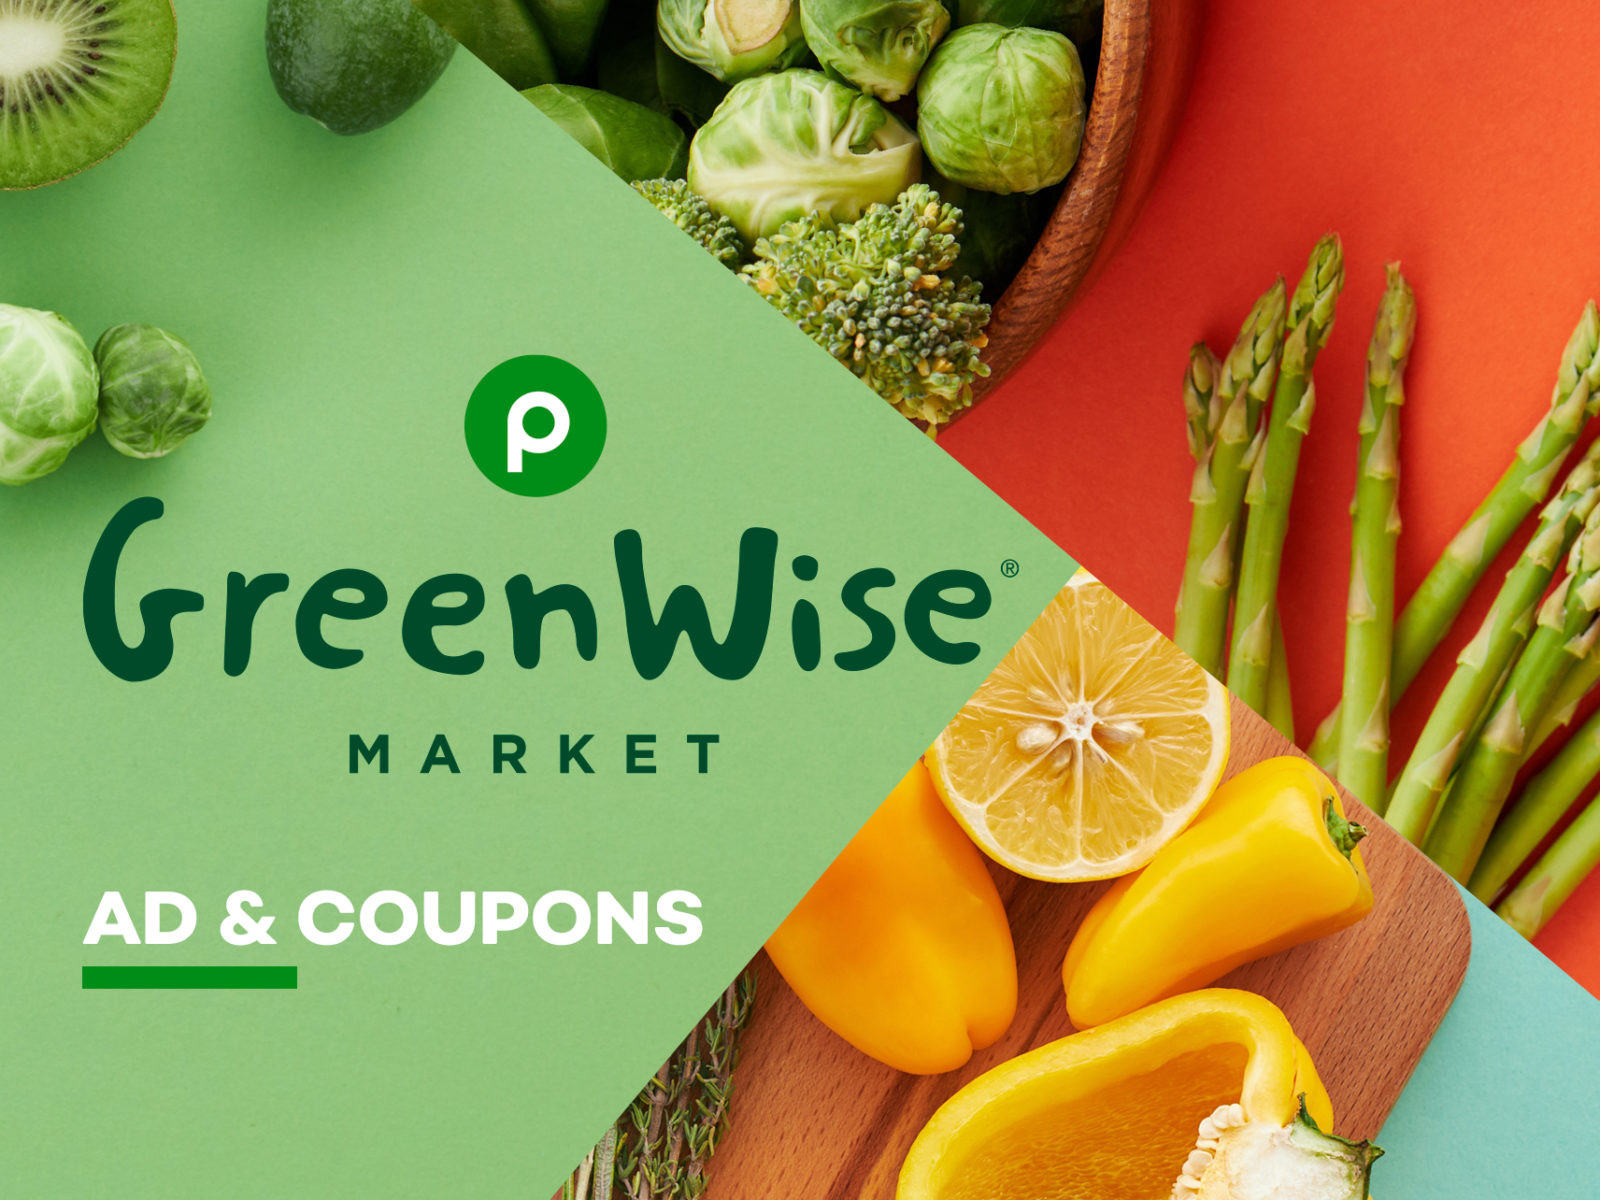 Publix GreenWise Market Ad & Coupons Week Of 4/27 to 5/3 (4/26 to 5/2 For Some)